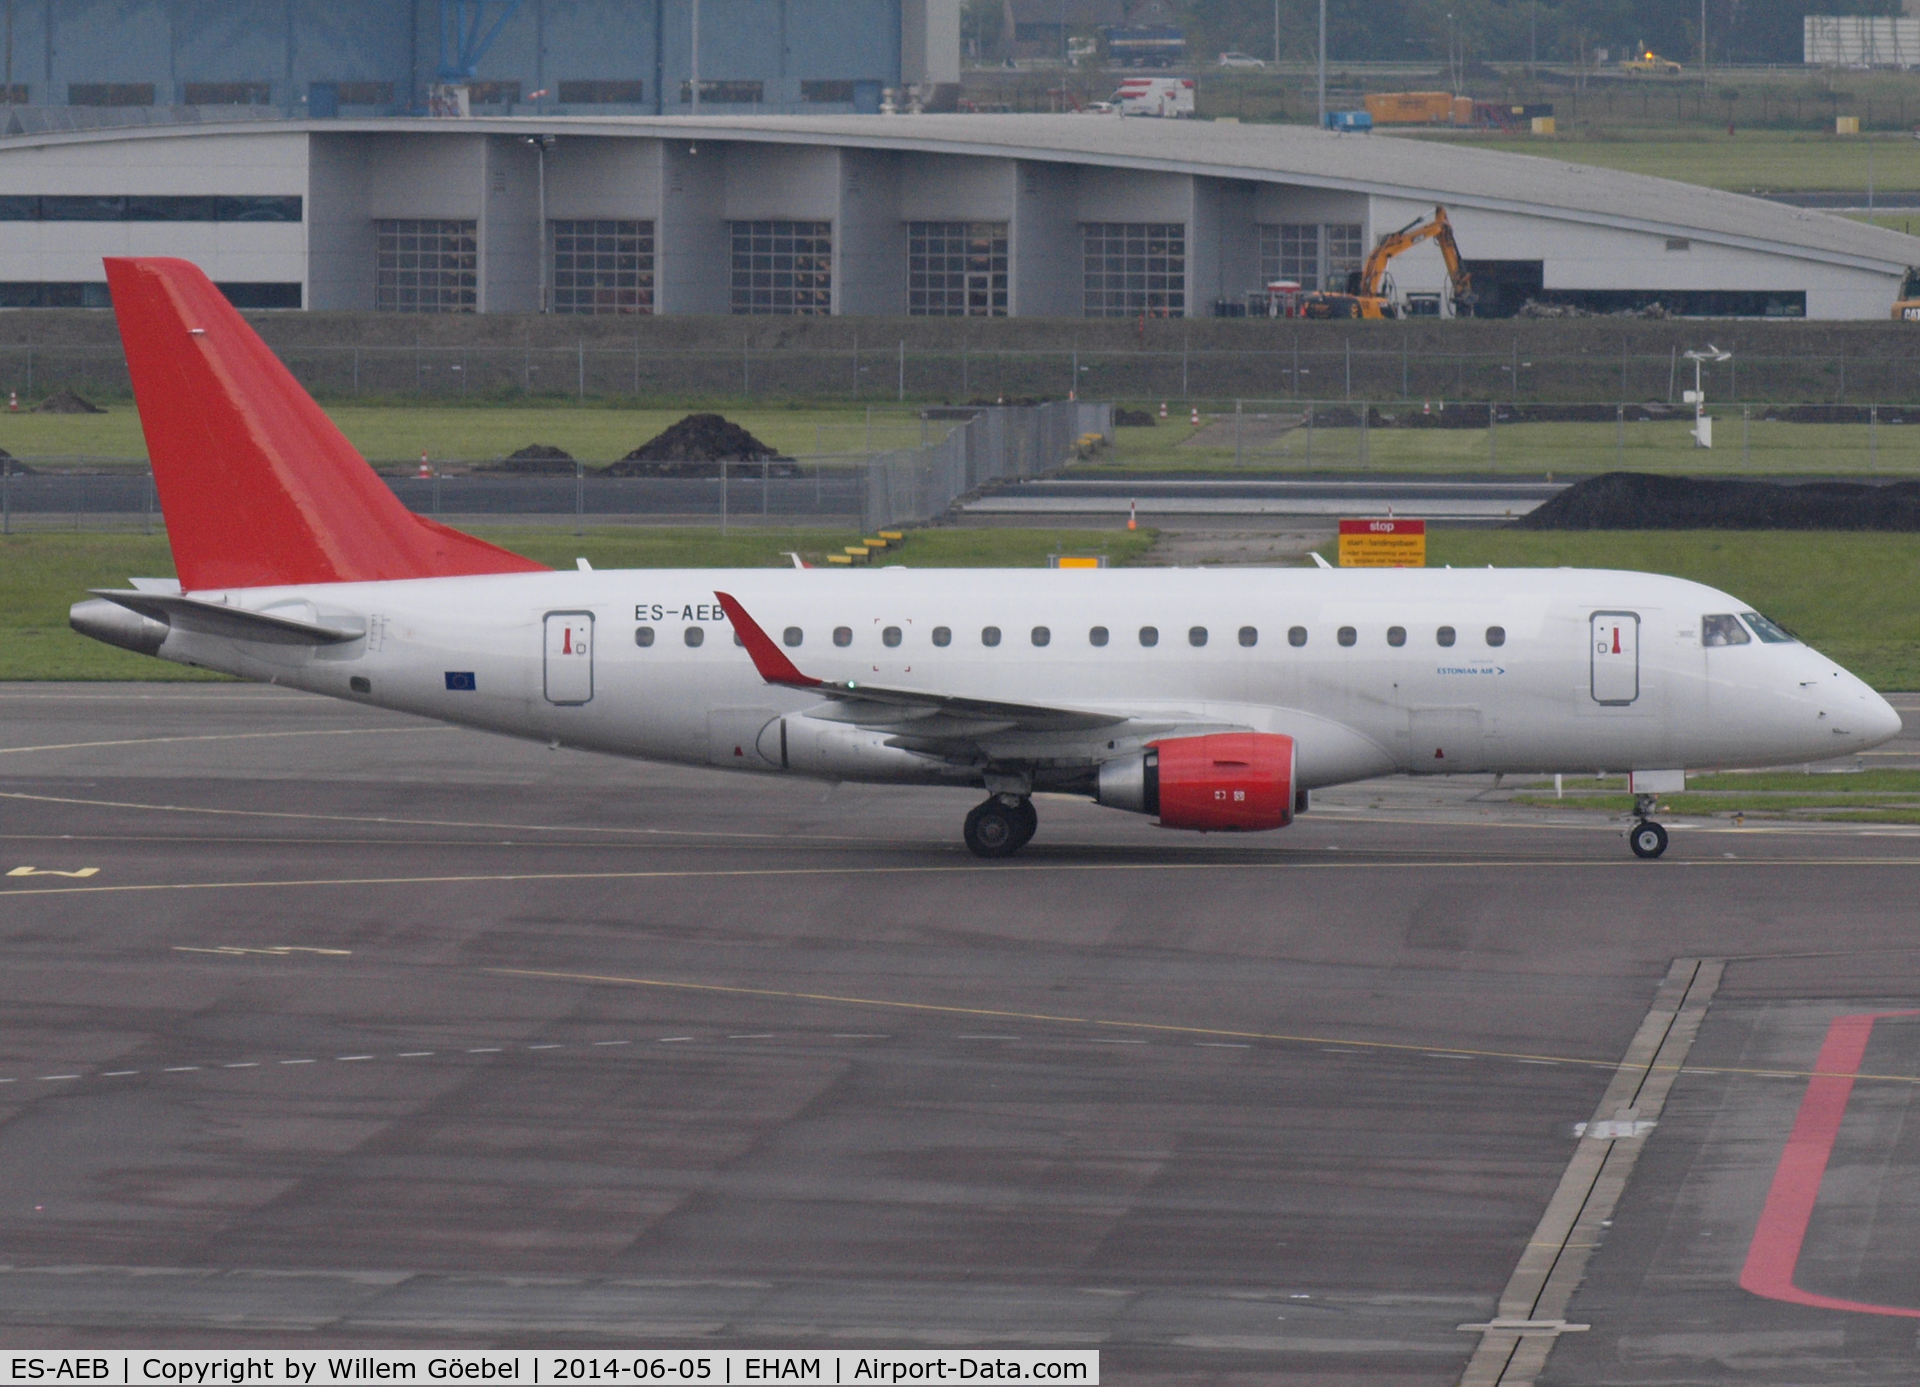 ES-AEB, 2005 Embraer 170LR (ERJ-170-100LR) C/N 17000106, Taxi to the gate in new colours